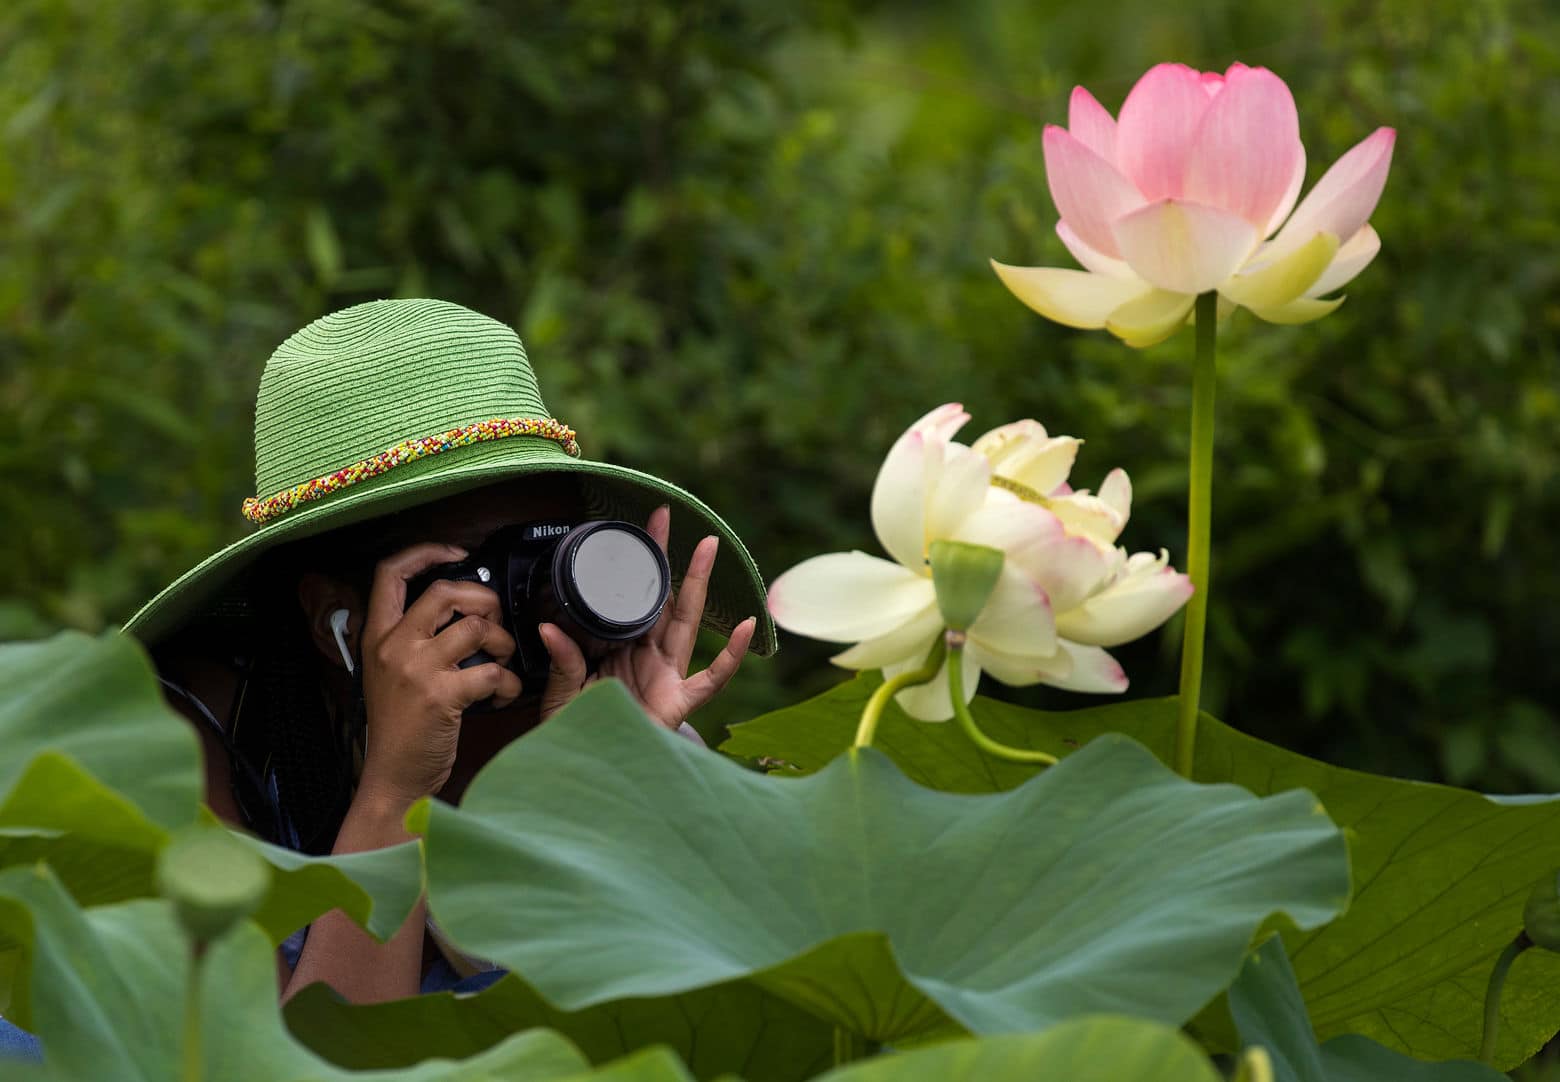 A woman who did not wish to give her name photographs blooming lotus flowers at Kenilworth Park and Aquatic Gardens in Washington, Saturday, July 8, 2017. The week-long "Lotus and Water Lily Festival" begins, Saturday July 15, at the park. (AP Photo/Carolyn Kaster)